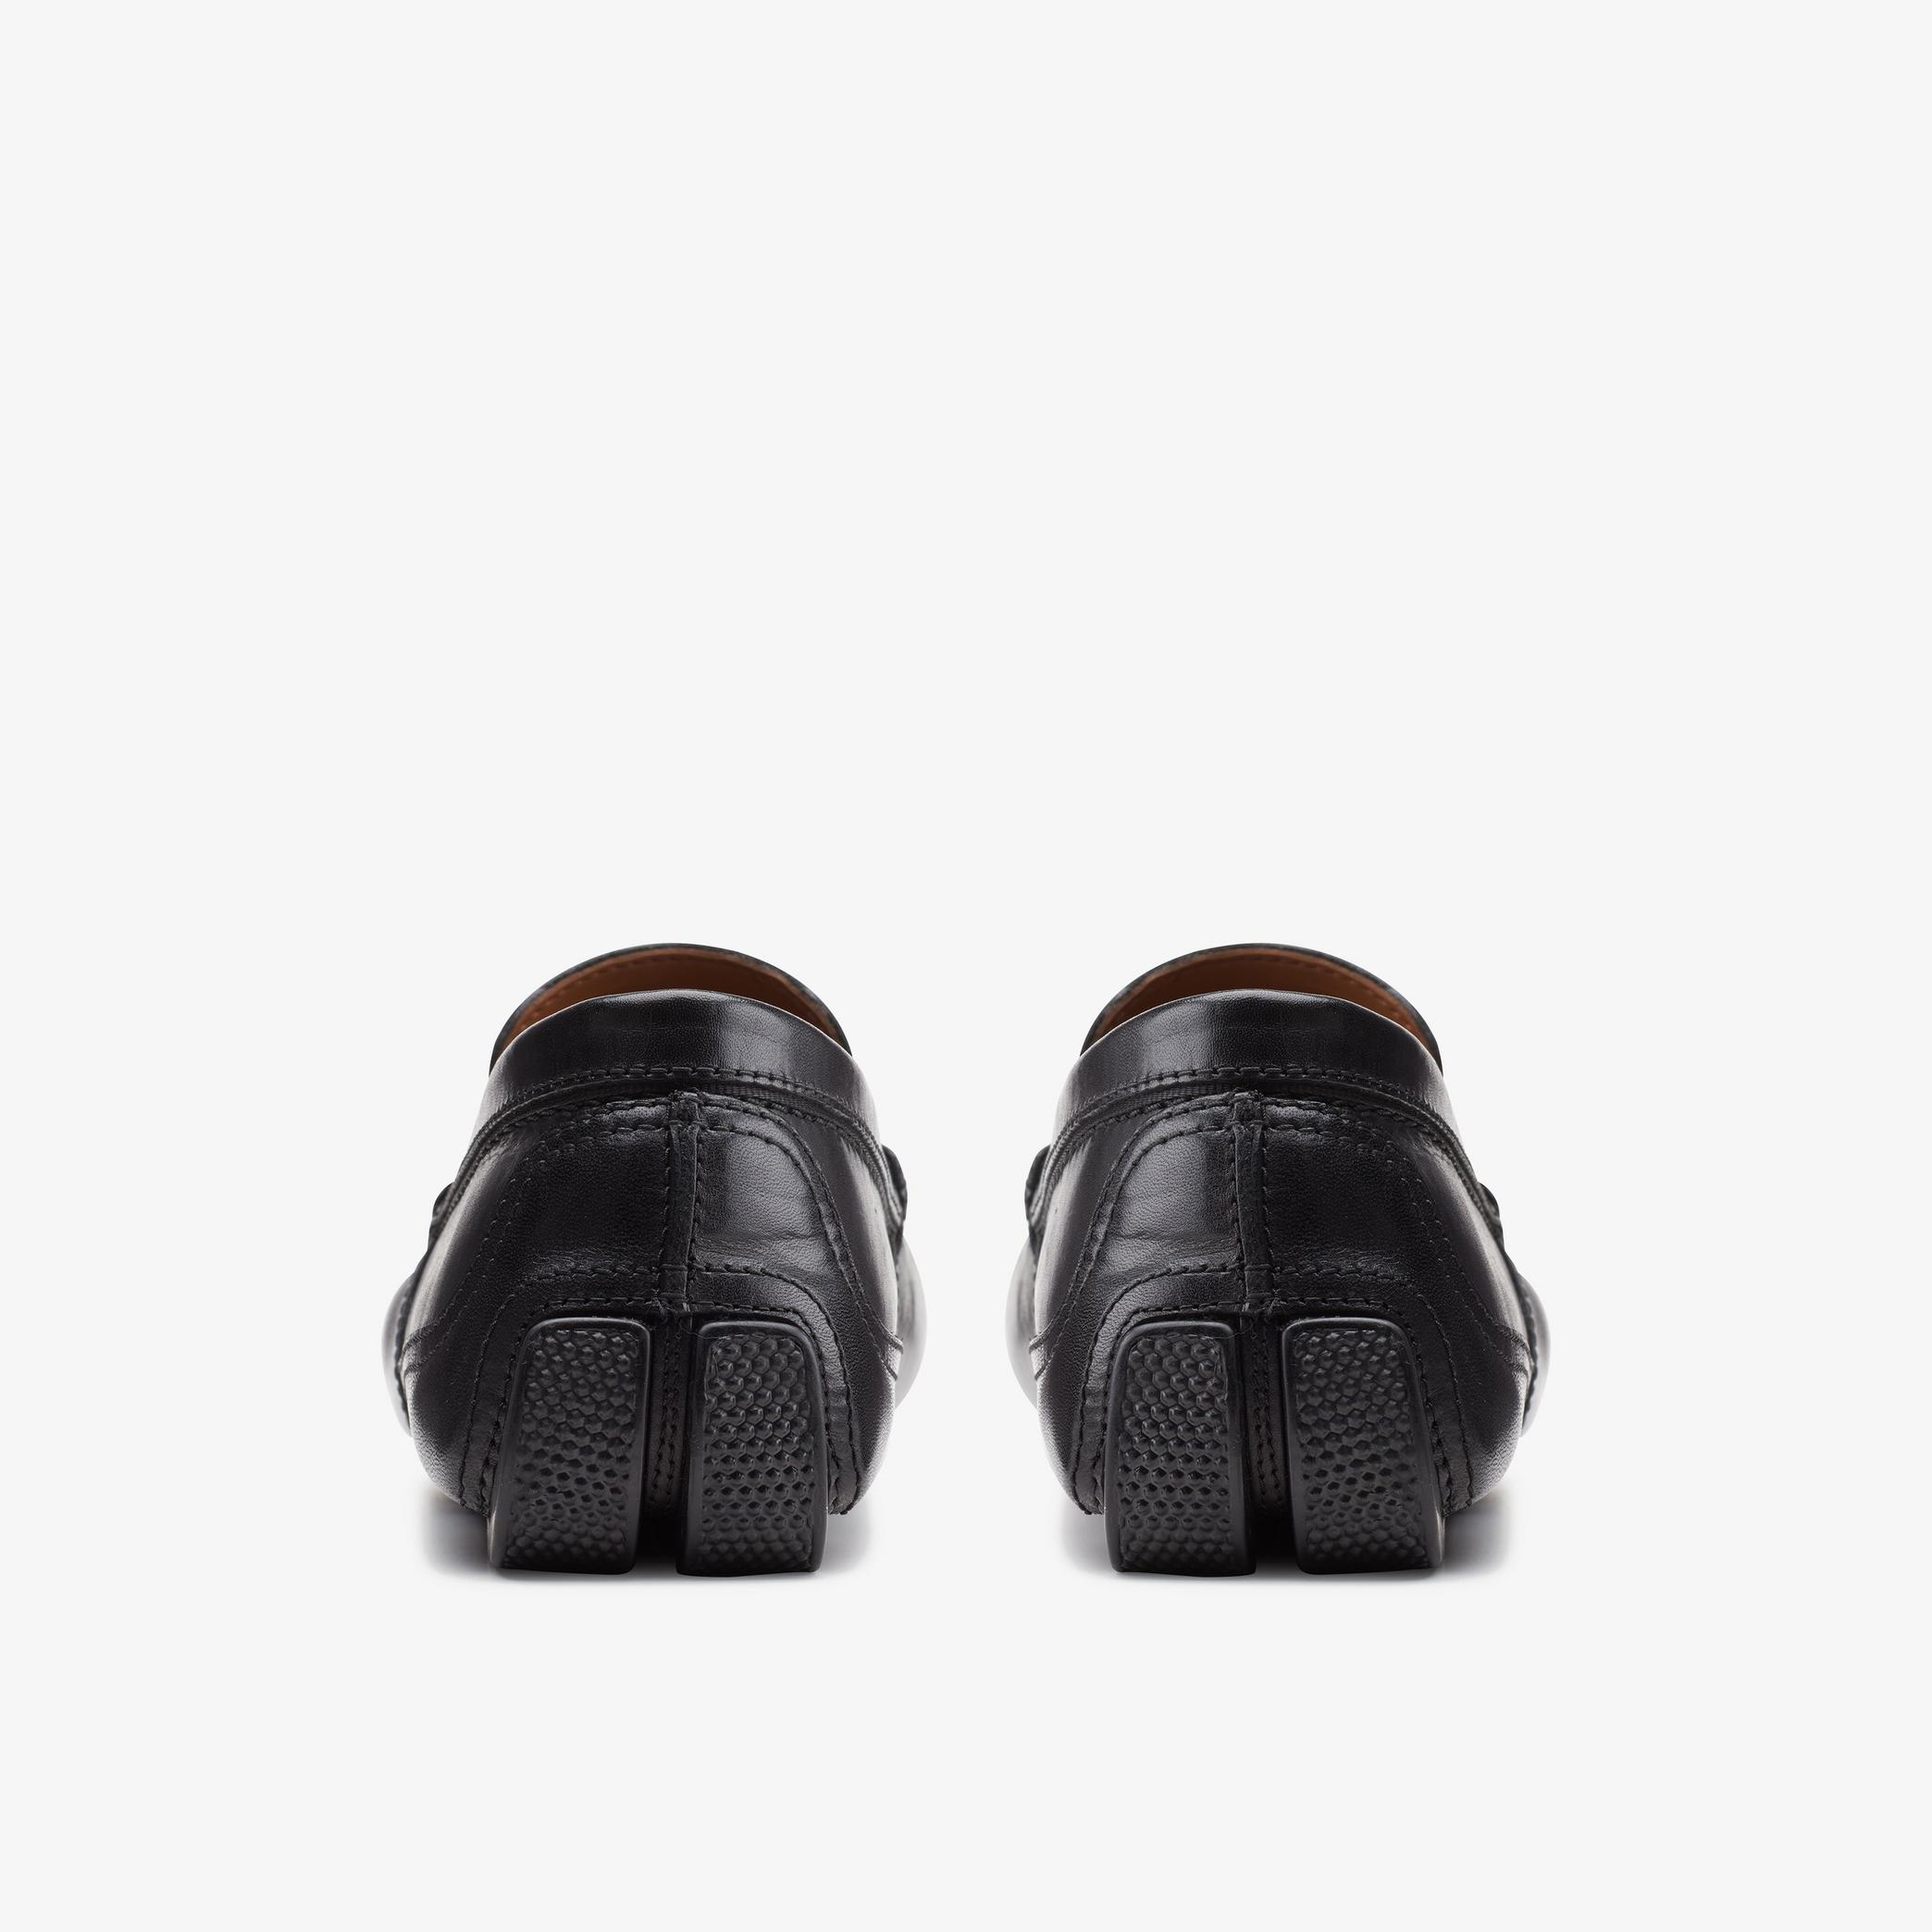 Markman Plain Black Leather Loafers, view 5 of 5